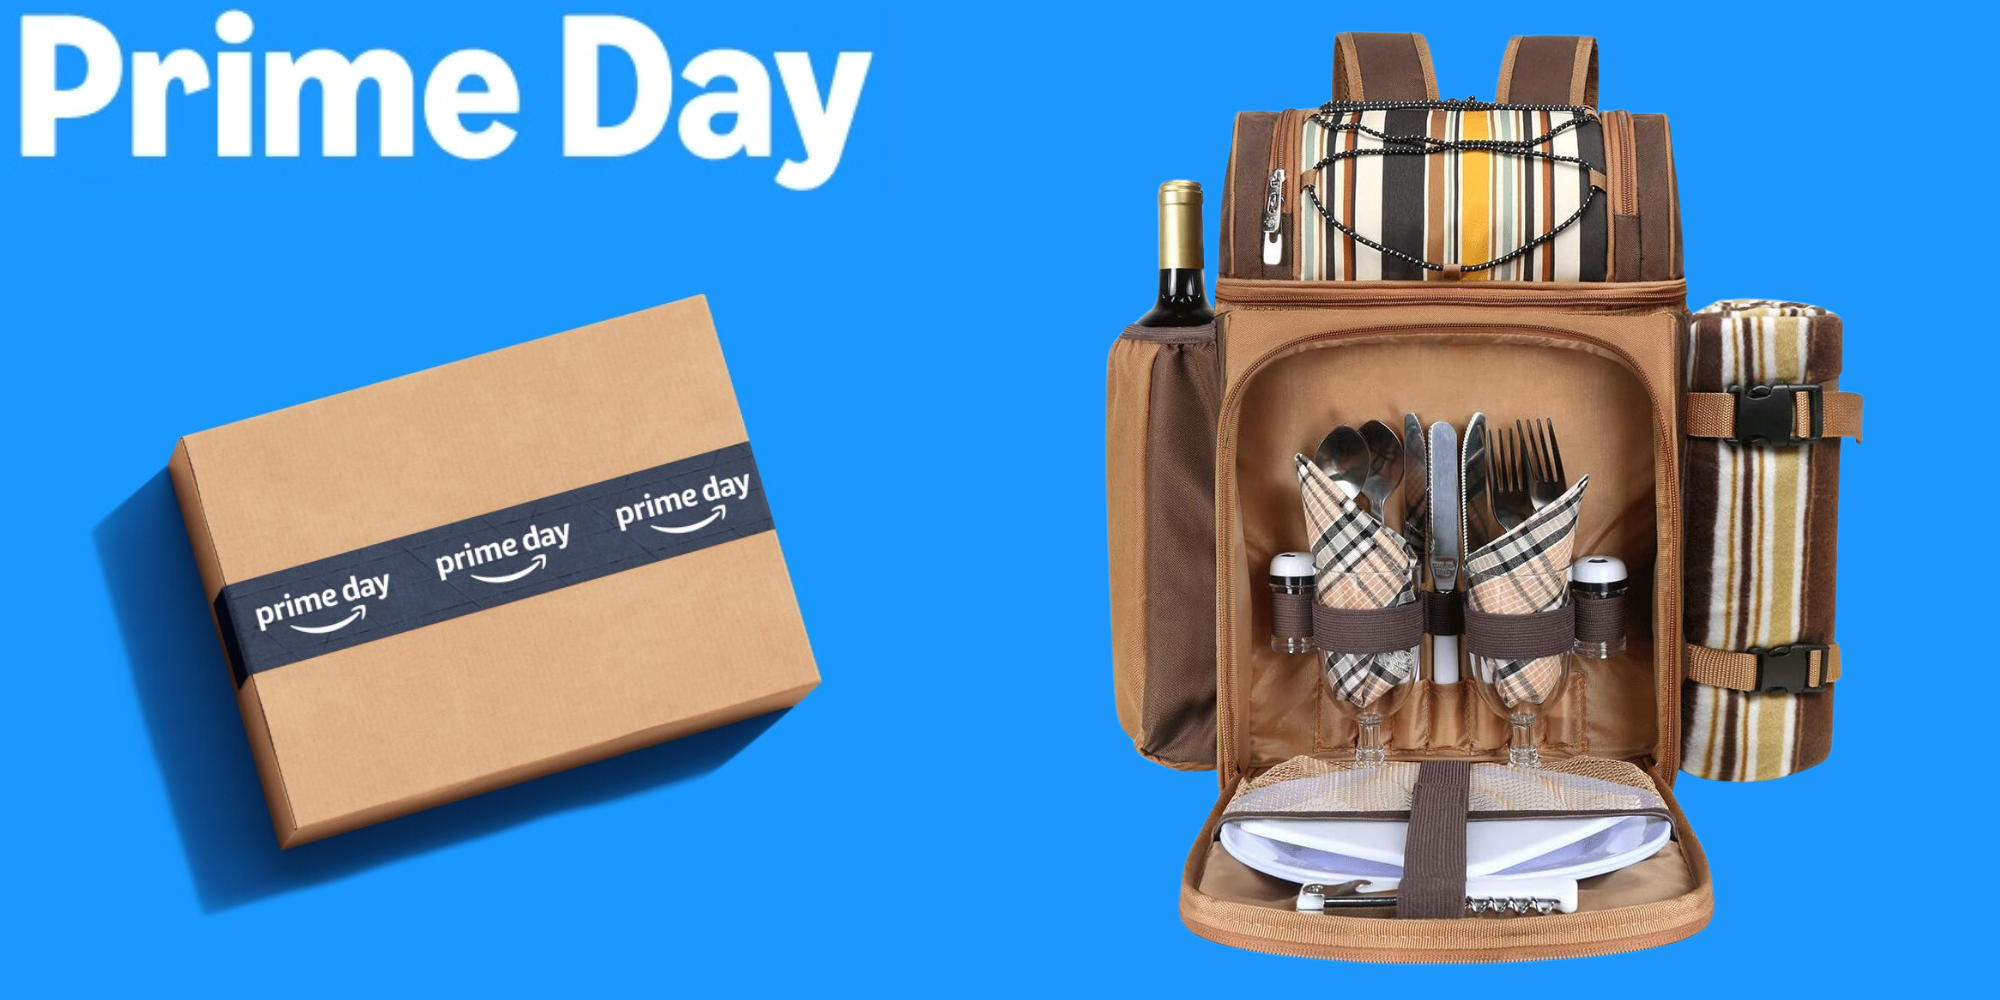 Best Amazon Prime Day Deals for Couples to Enjoy Together